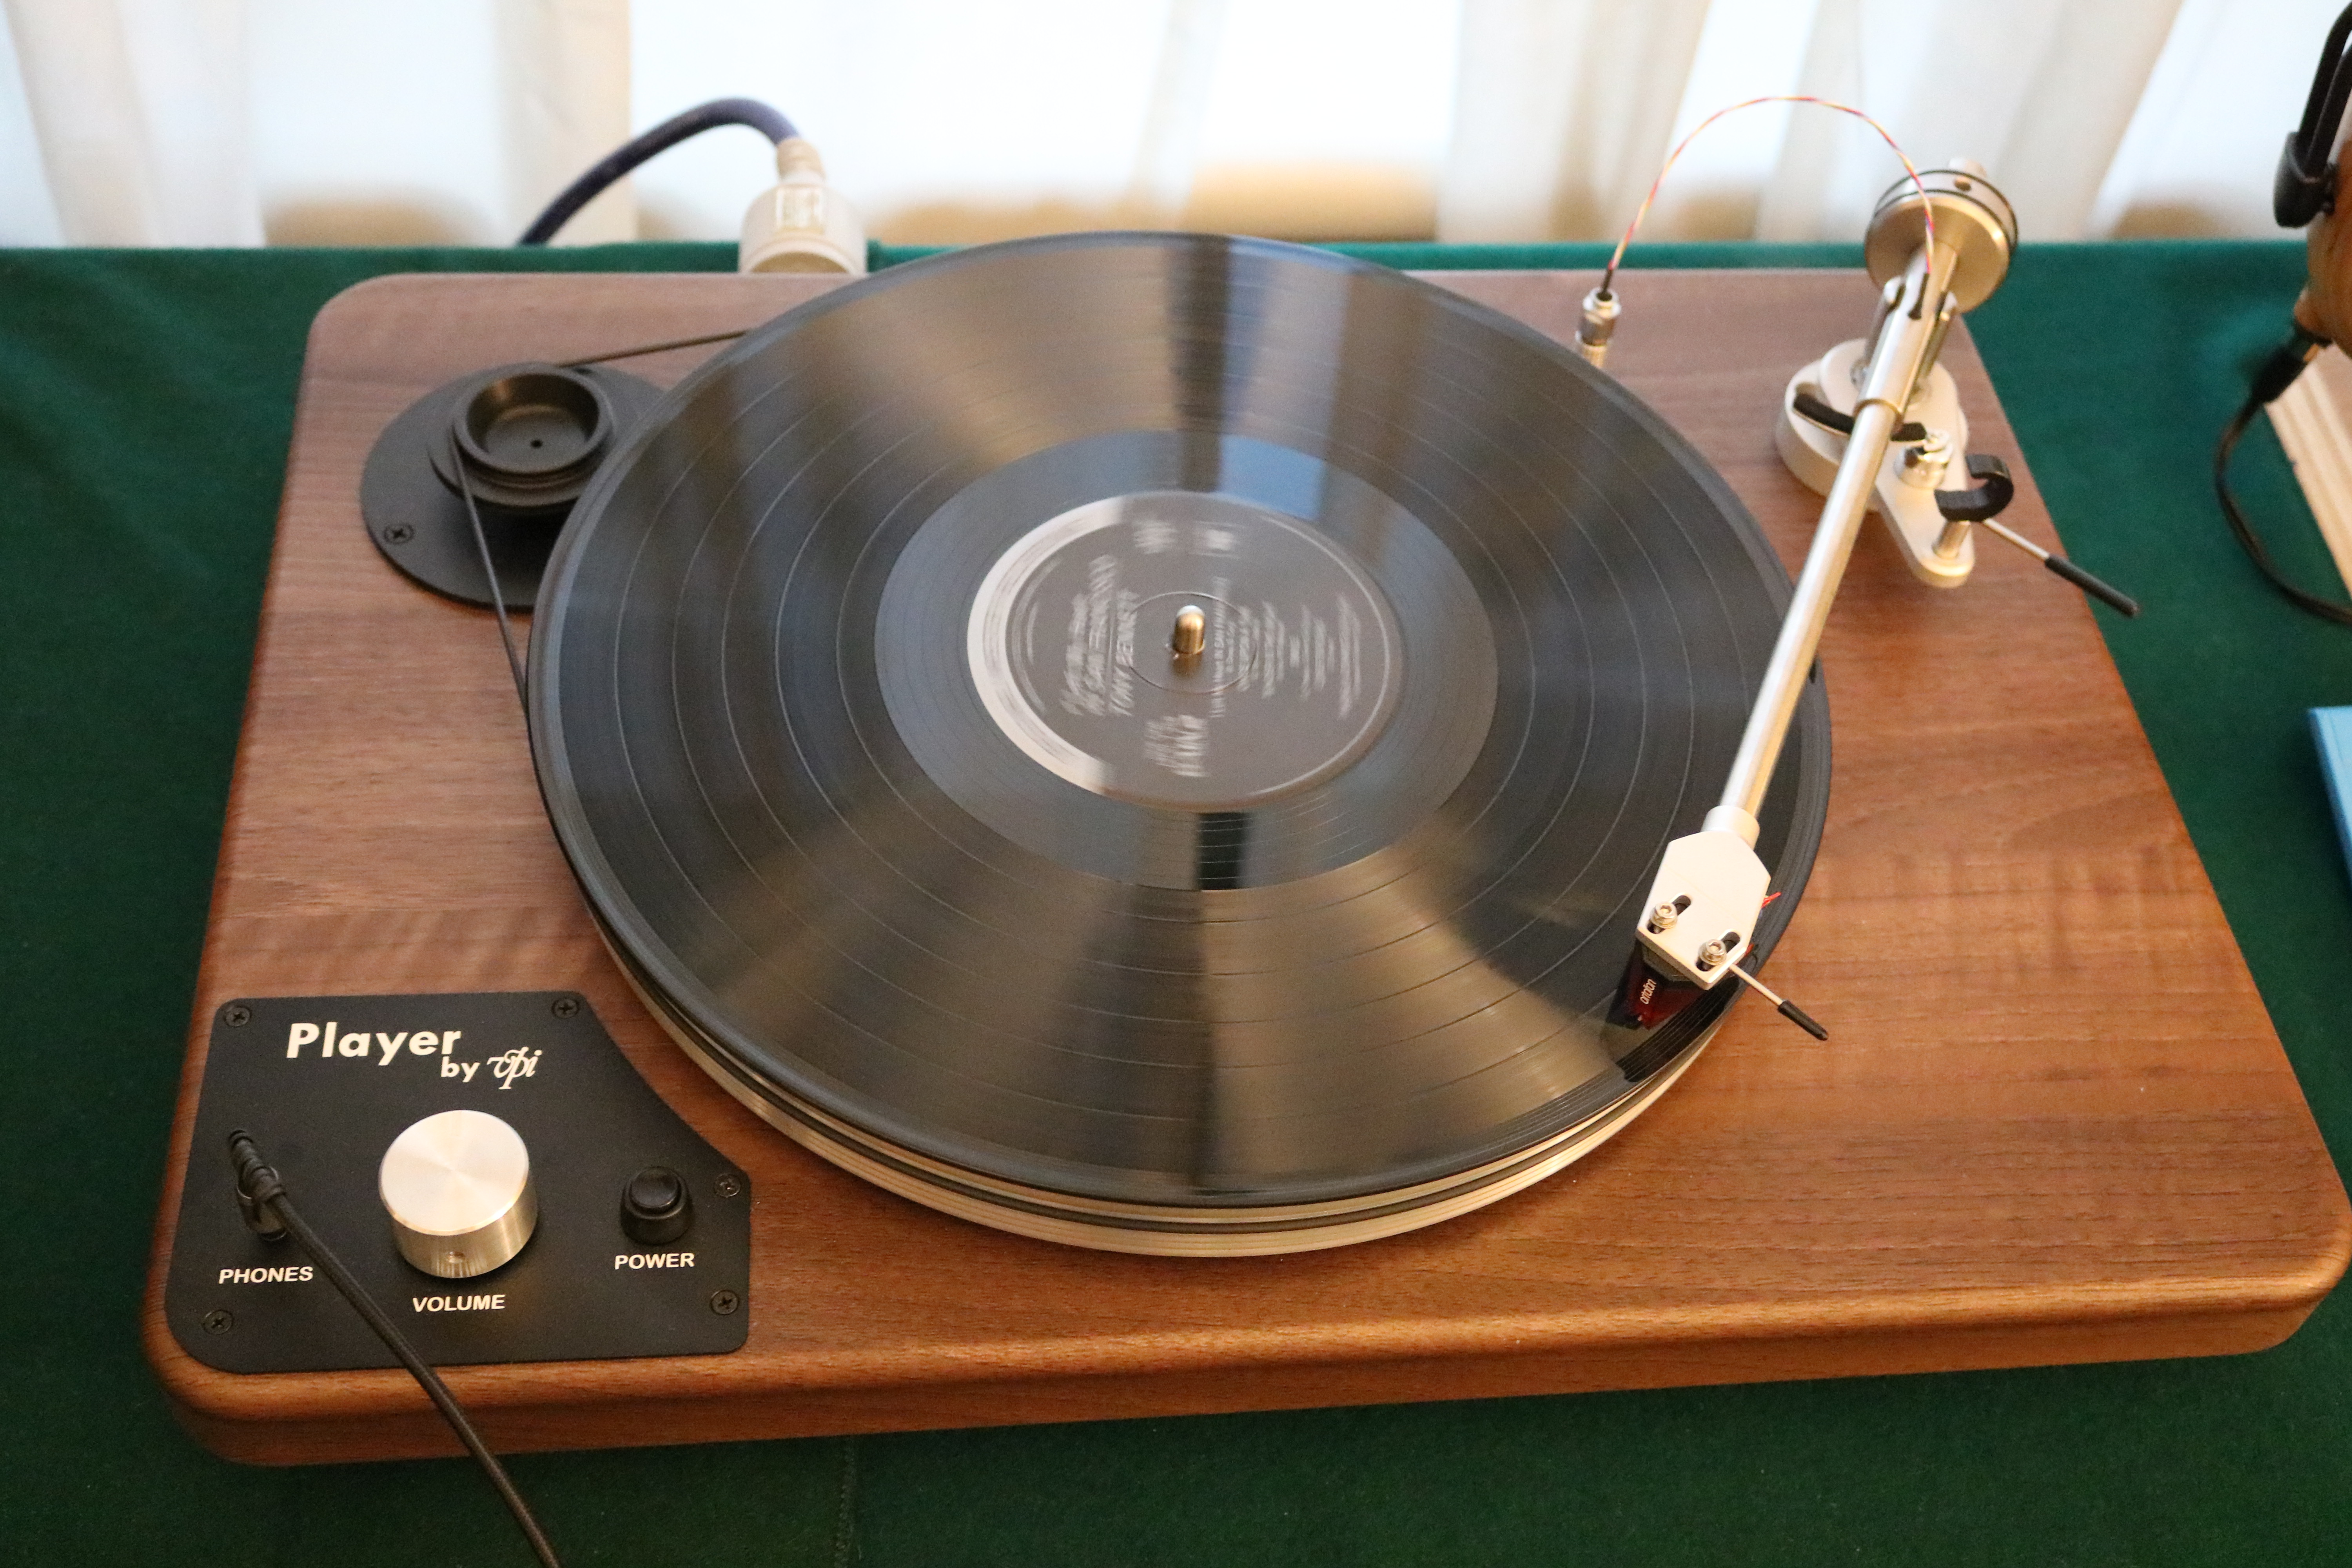 The Player turntable by VPI which has a built-in headphone amp.